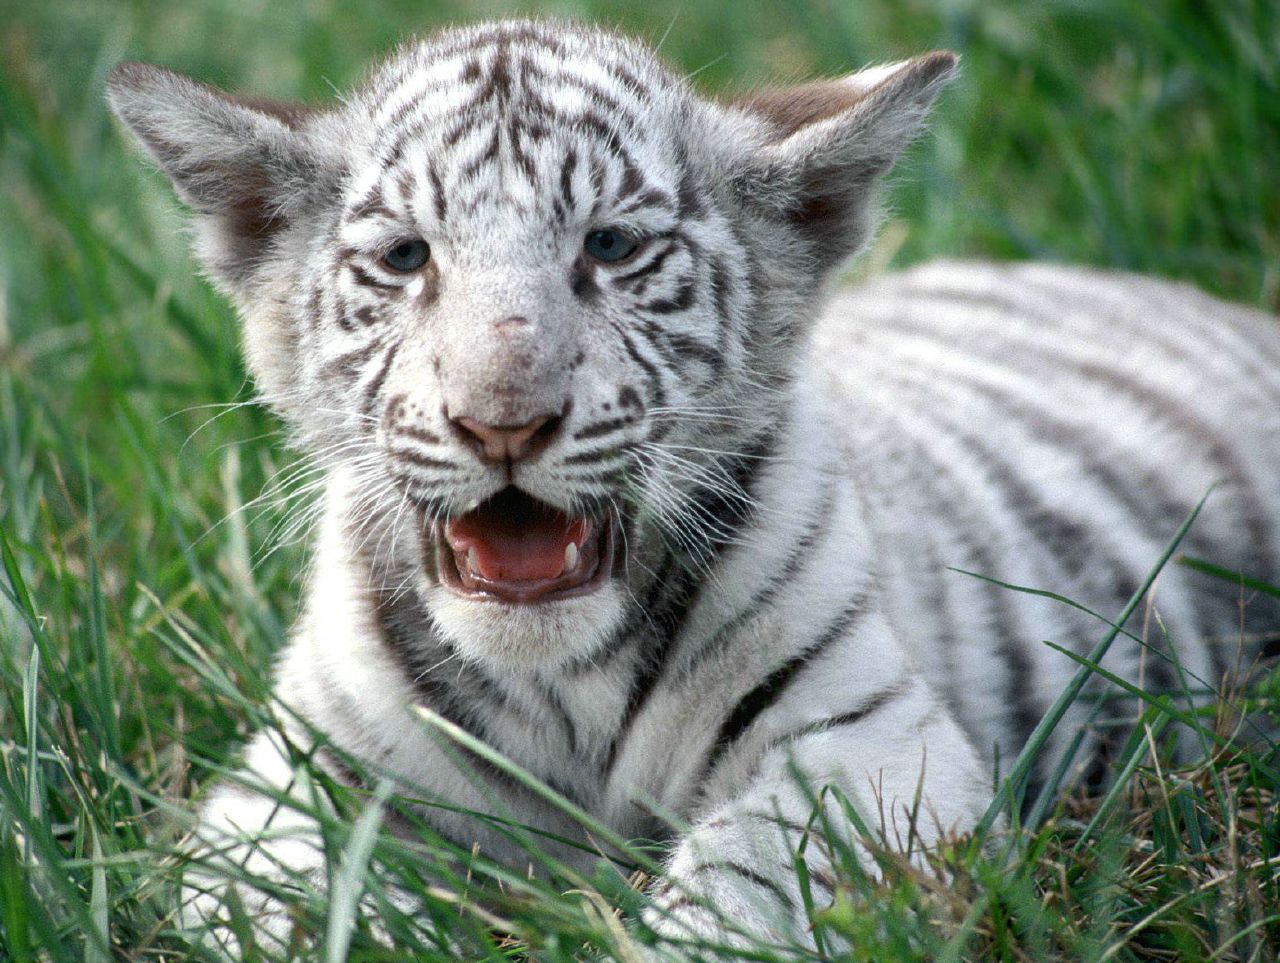 What biome does the white tiger live in?